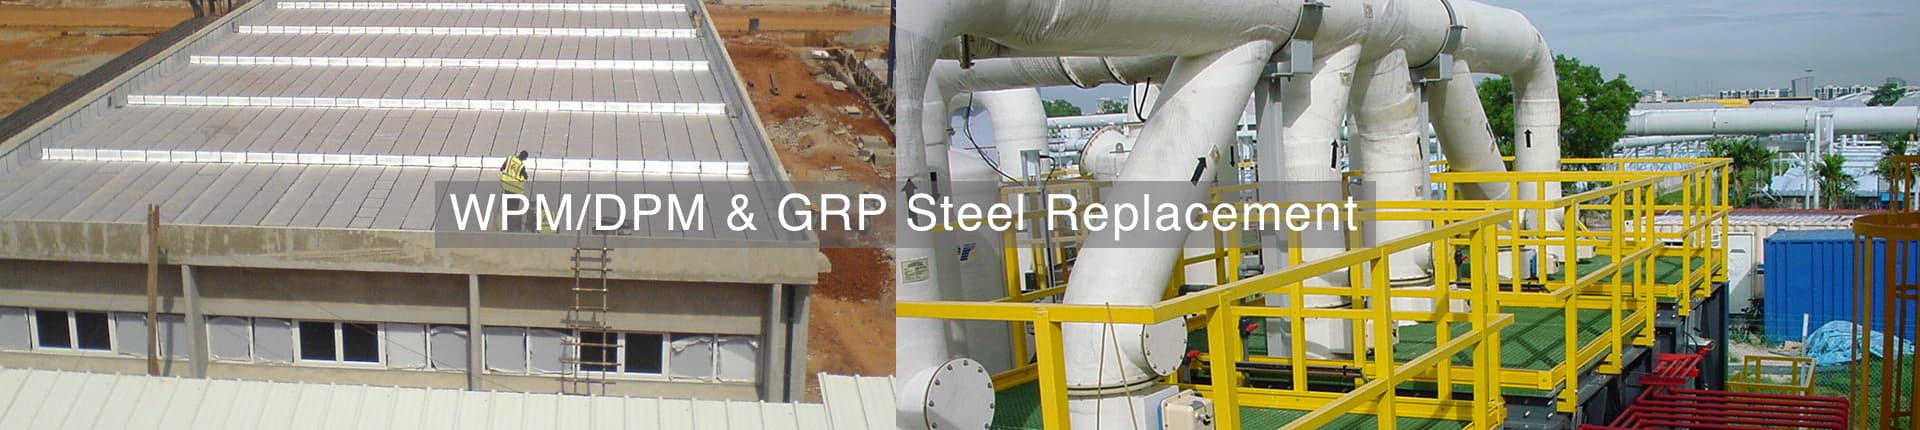 GRP Steel Replacement